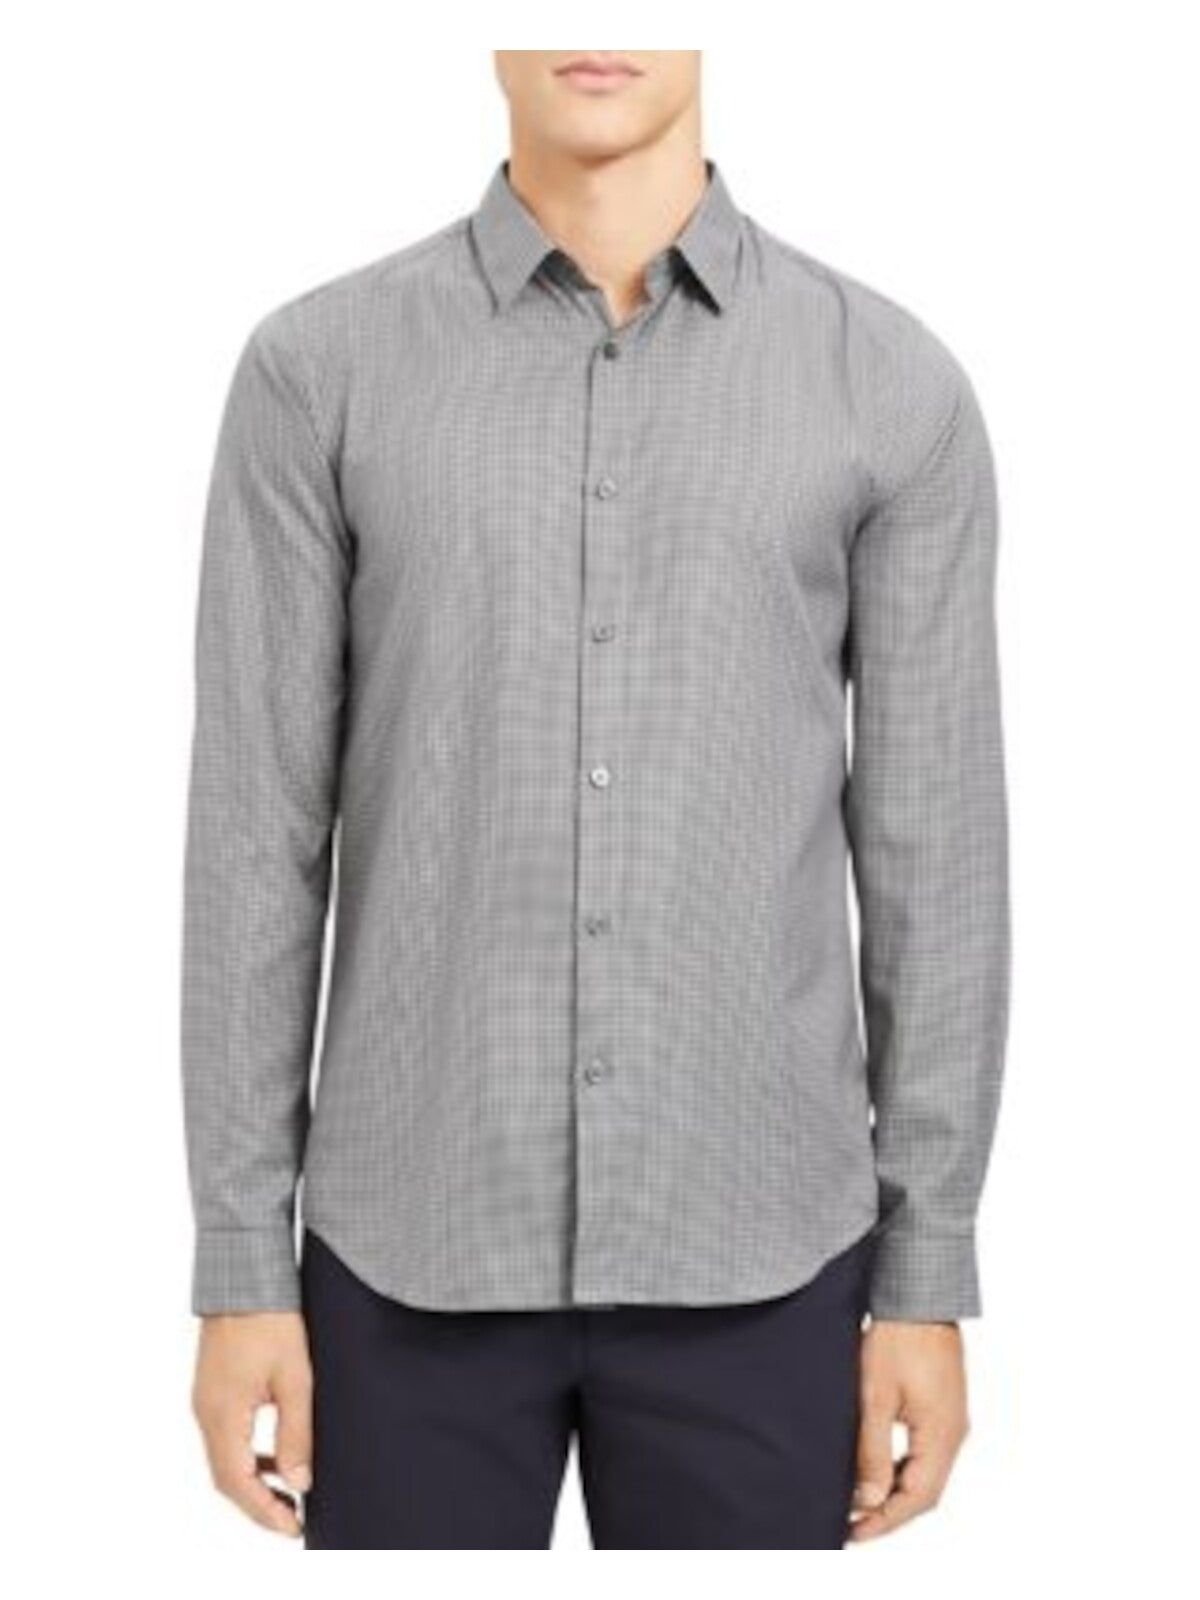 THEORY Mens Blue Check Collared Slim Fit Button Down Shirt XS